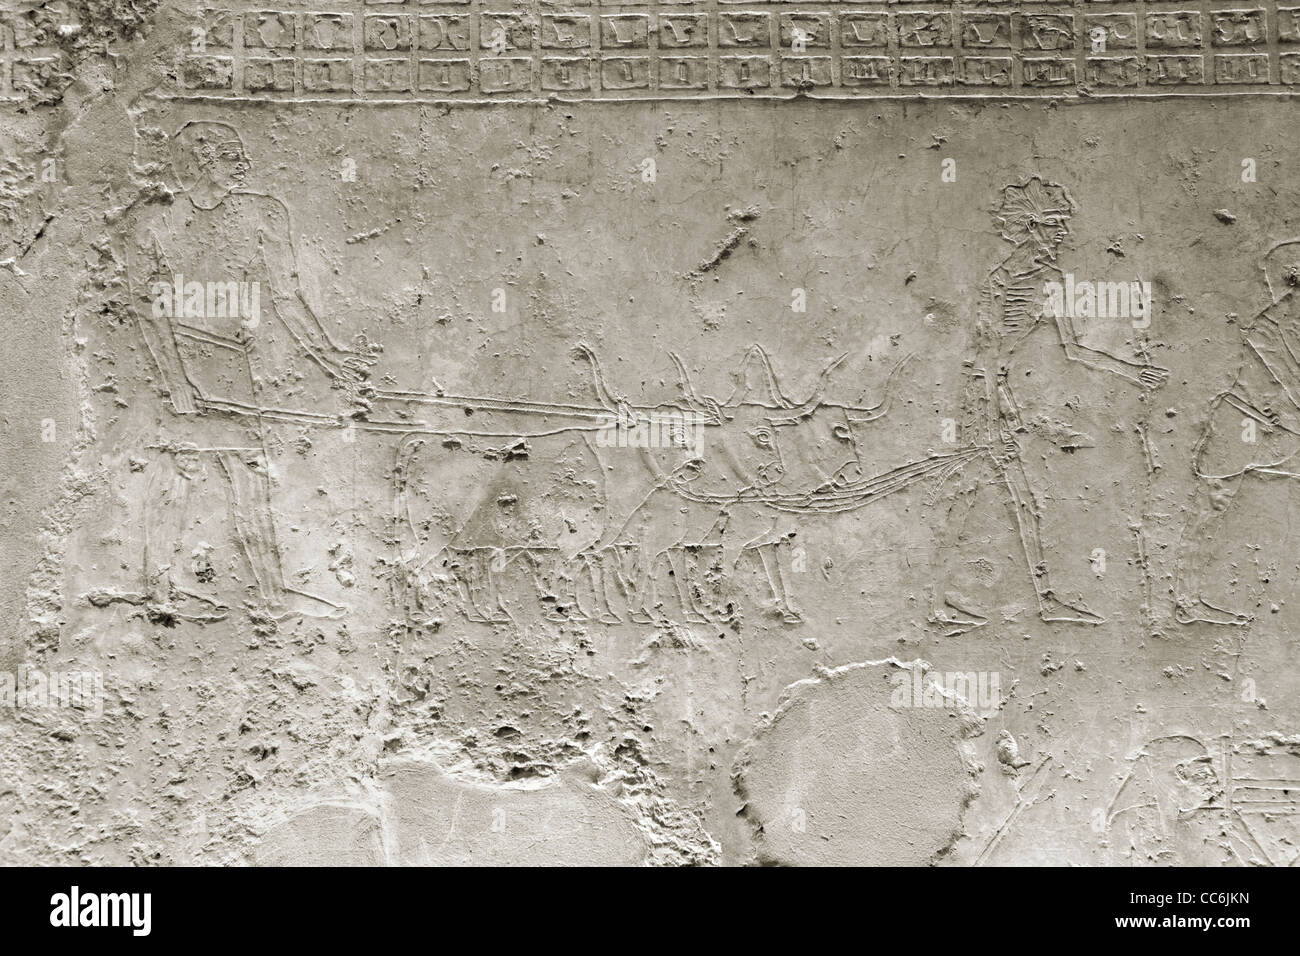 Reliefs in the Middle Kingdom tomb of Ukh Hotep Son of Senbi at Meir , North West of Asyut in Middle Egypt Stock Photo